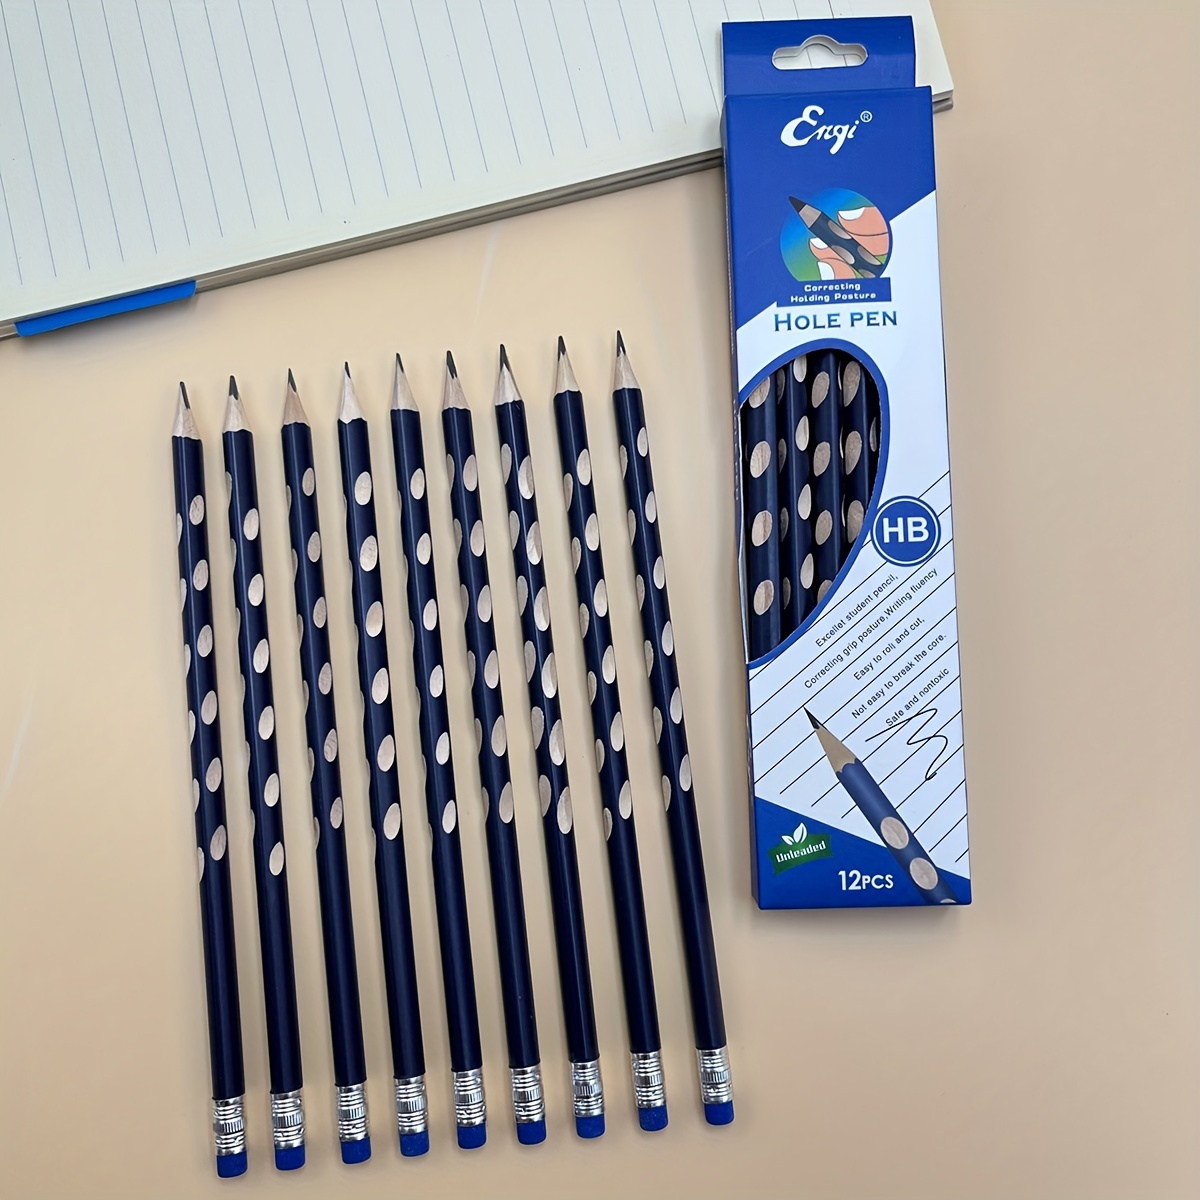 

12-piece Triangular Grip Pencils For Sketching & Writing - Ergonomic Design, 1.0-1.9mm Lead, Ideal For Artists & Office Use